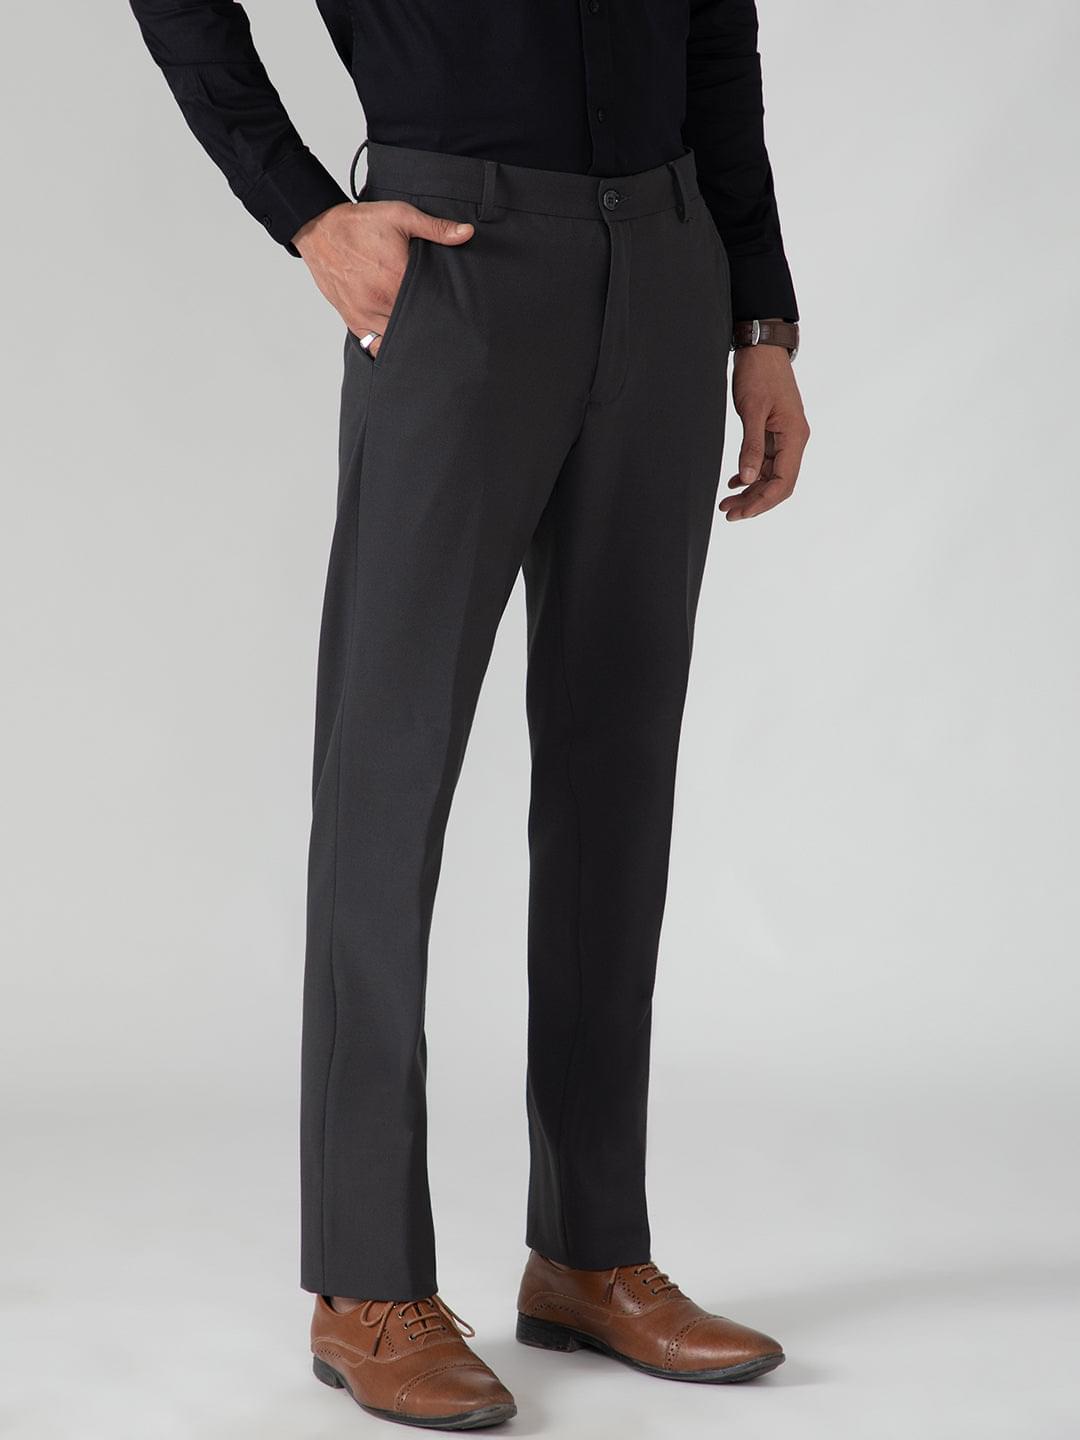 4-Way Stretch Formal Trousers in Charcoal Grey- Slim Fit